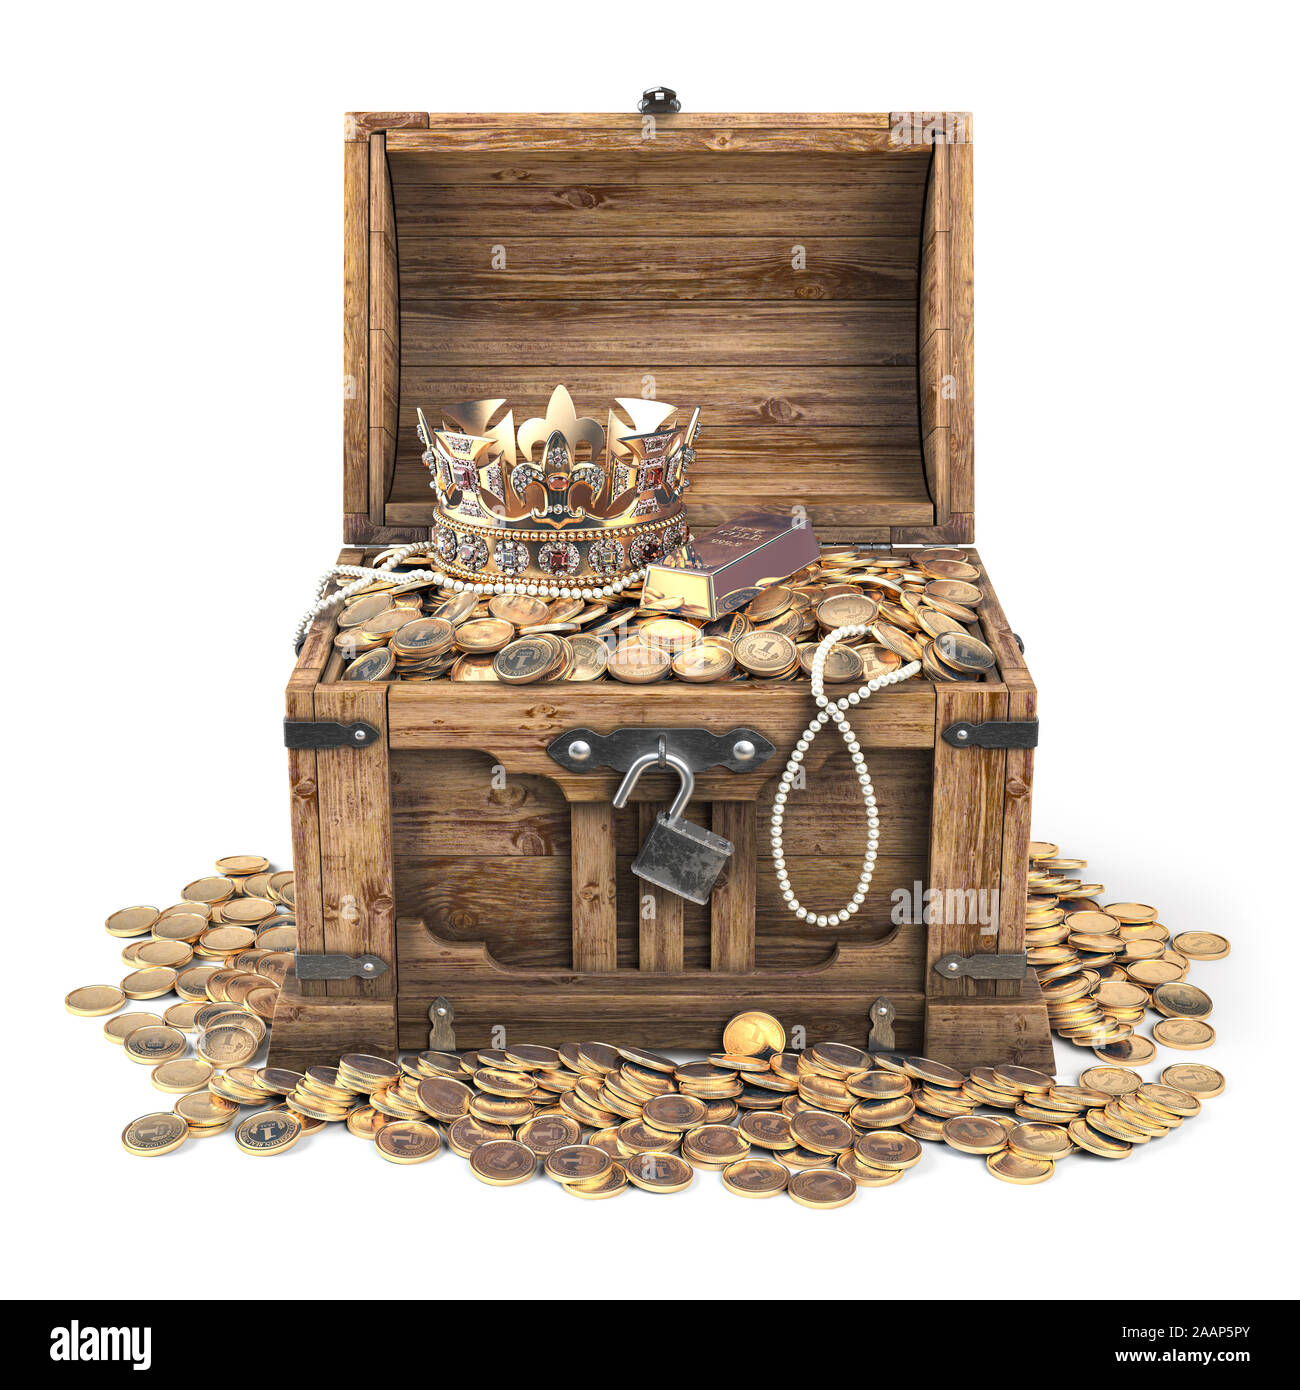 Wooden chest overflowing with treasure Stock Photo - Alamy